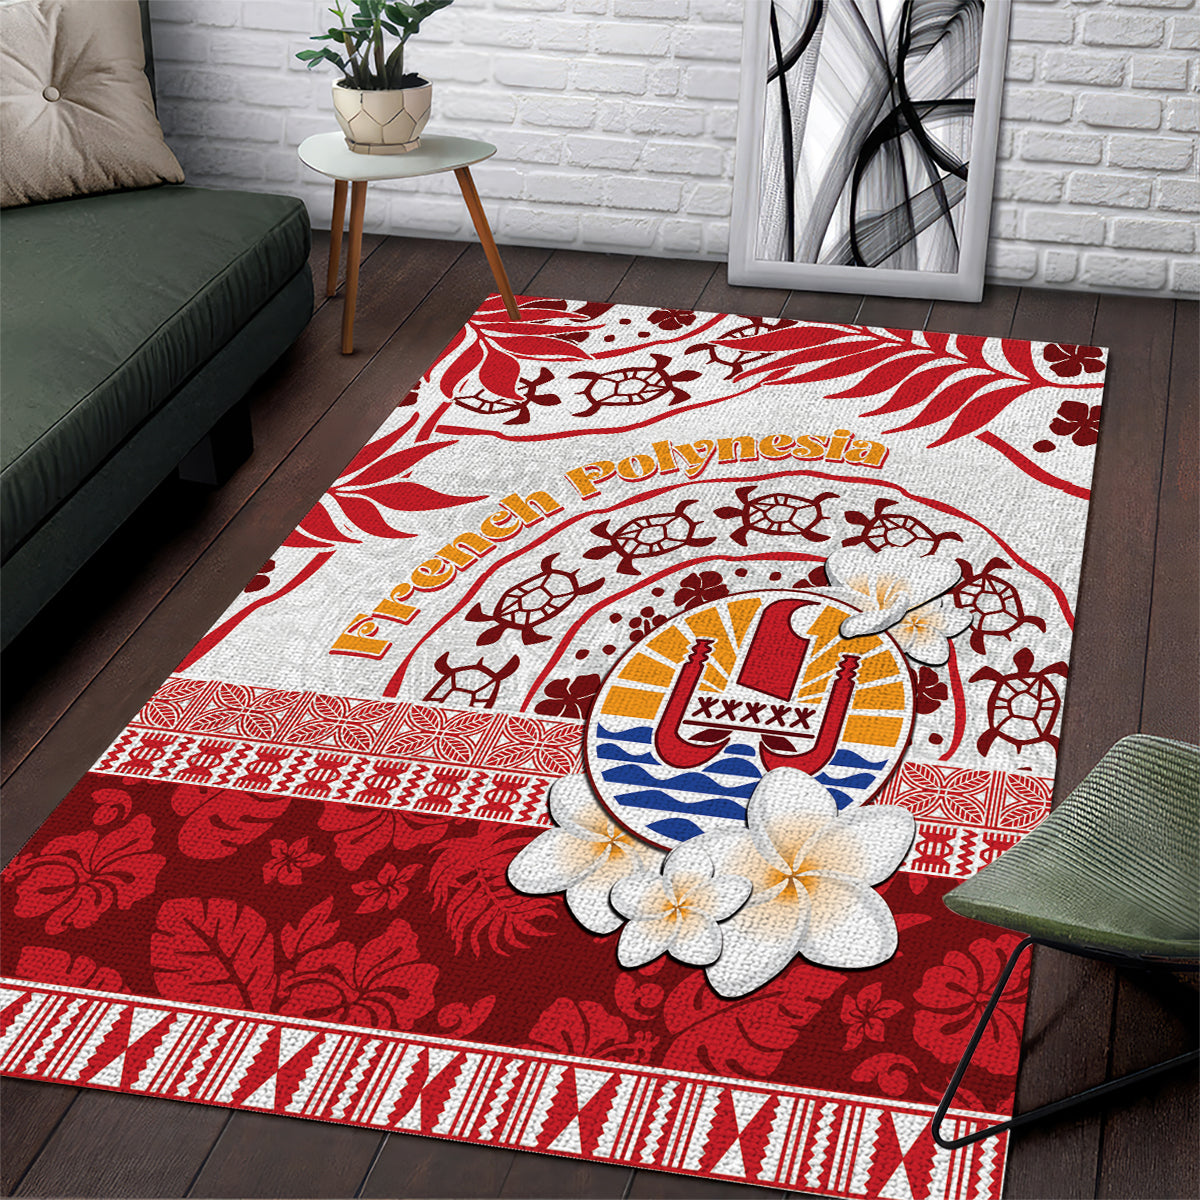 French Polynesia Internal Autonomy Day Area Rug Tropical Hibiscus And Turtle Pattern